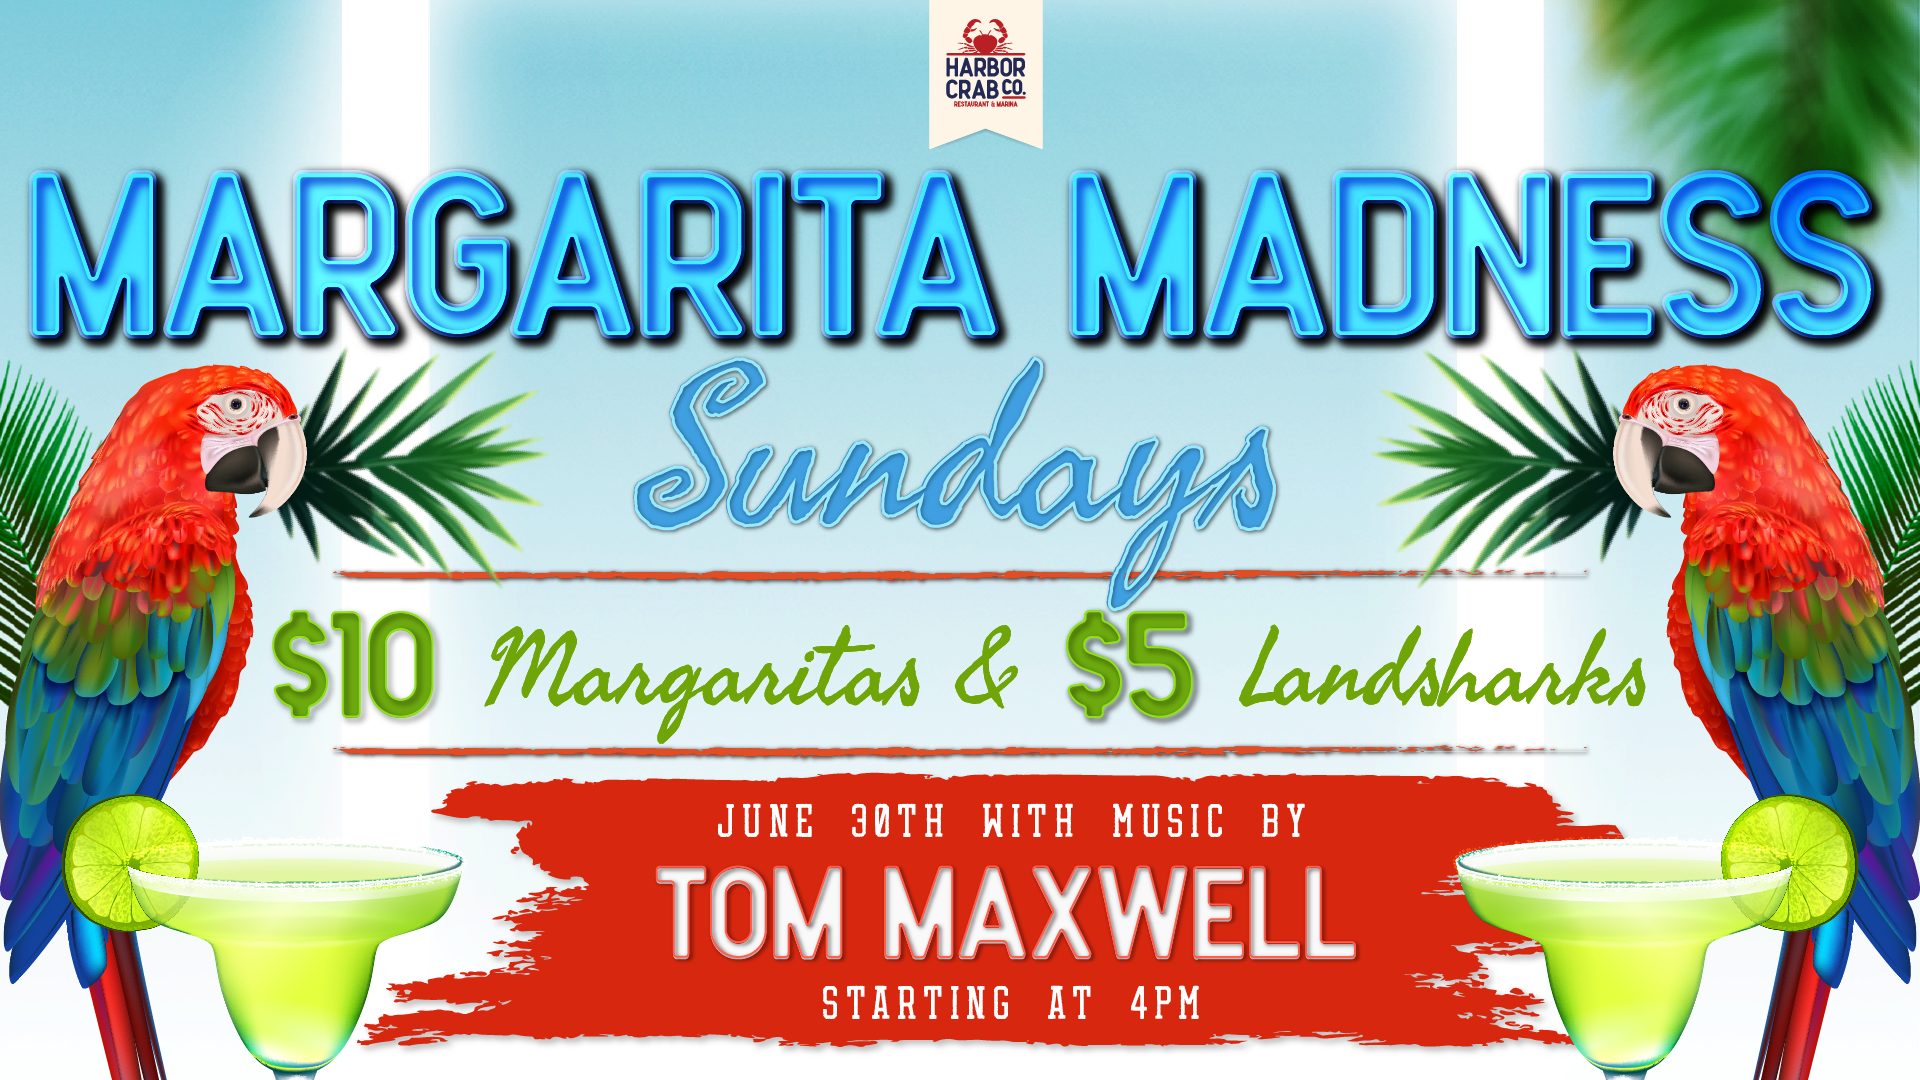 Margarita Madness Sundays with $10 margaritas, $5 Landsharks, and Tom Maxwell on June 30th at 4pm.